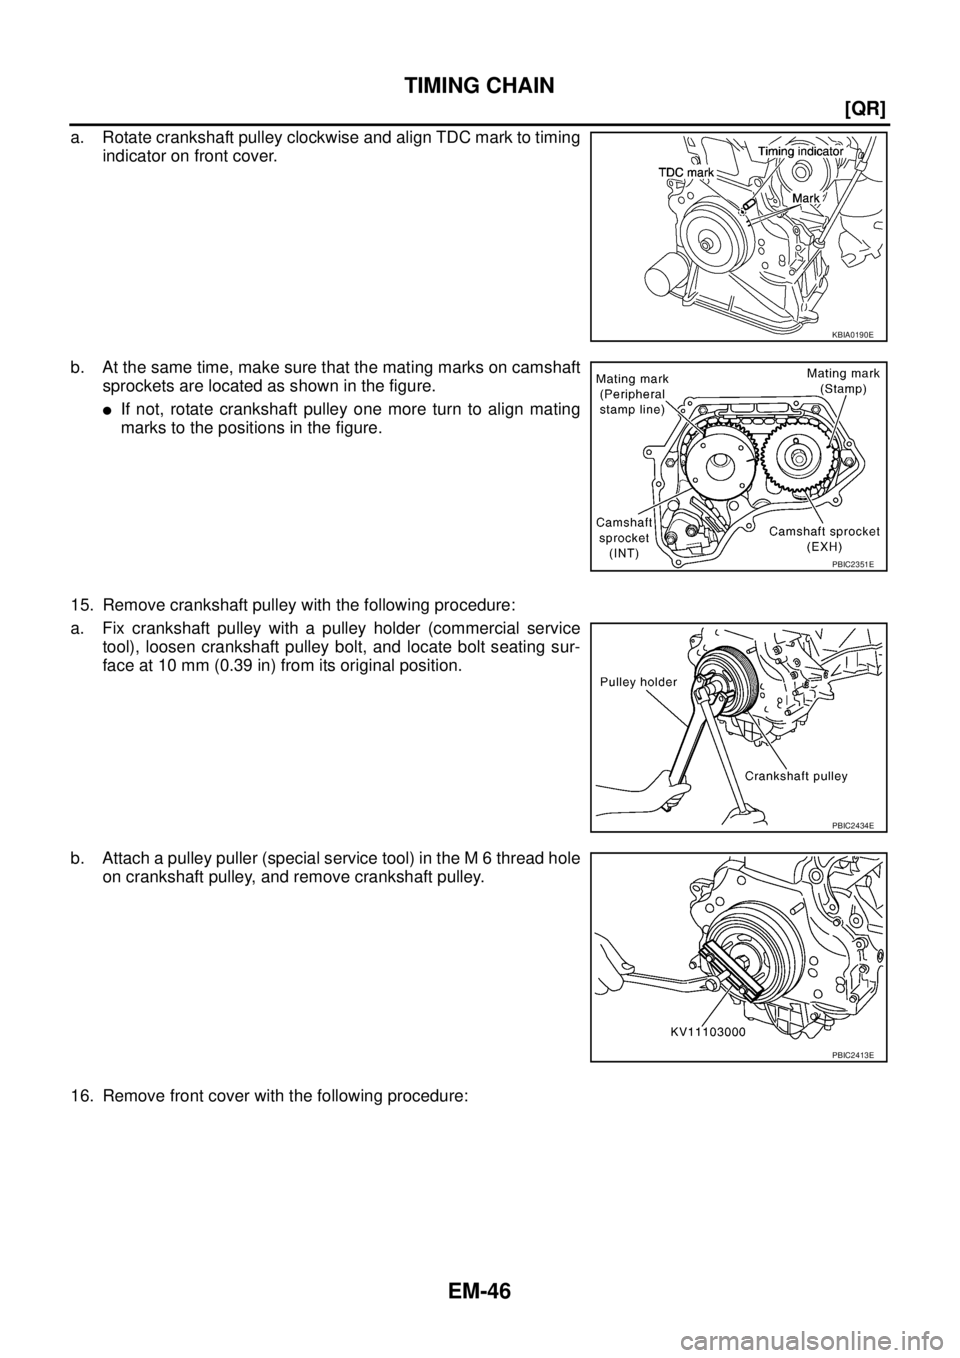 NISSAN X-TRAIL 2003  Service Repair Manual EM-46
[QR]
TIMING CHAIN
 
a. Rotate crankshaft pulley clockwise and align TDC mark to timing
indicator on front cover. 
b. At the same time, make sure that the mating marks on camshaft
sprockets are l